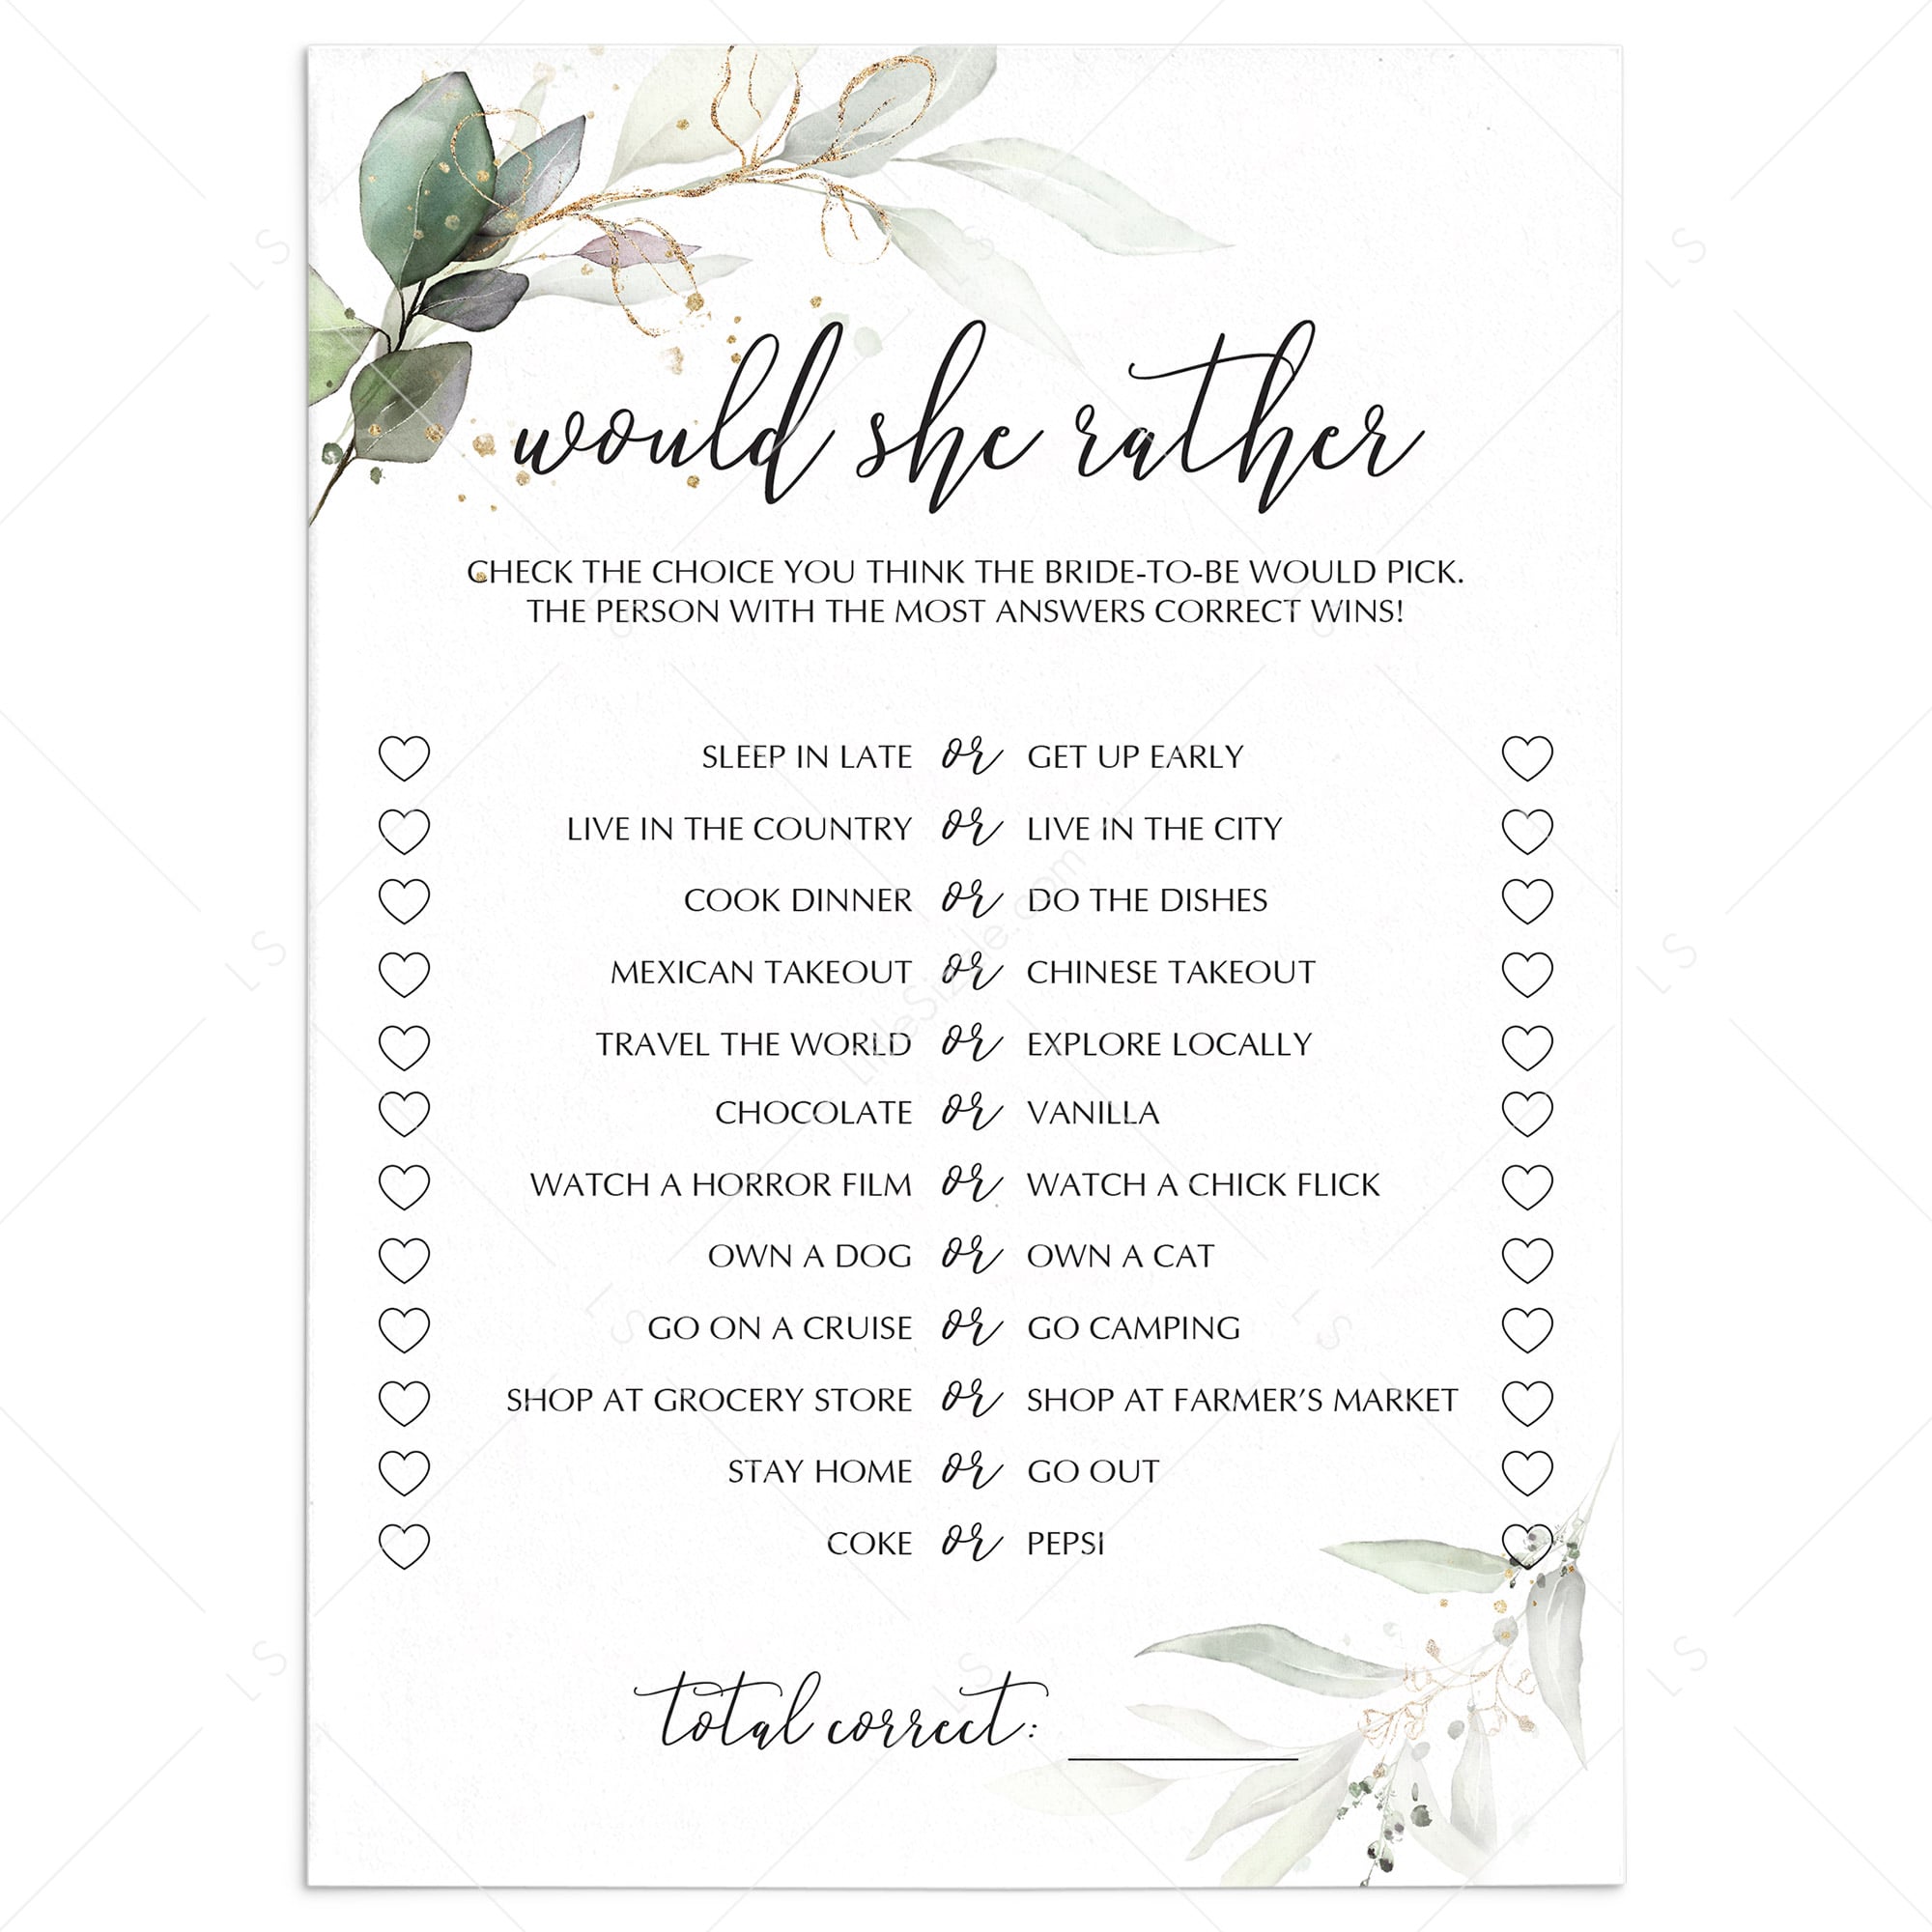 25 Floral How Well Do You Know The Bride Bridal Wedding Shower or  Bachelorette Party Game, Flowers Who Knows The Best, Does The Groom?  Couples Guessing Question Set of Cards Pack, Printed